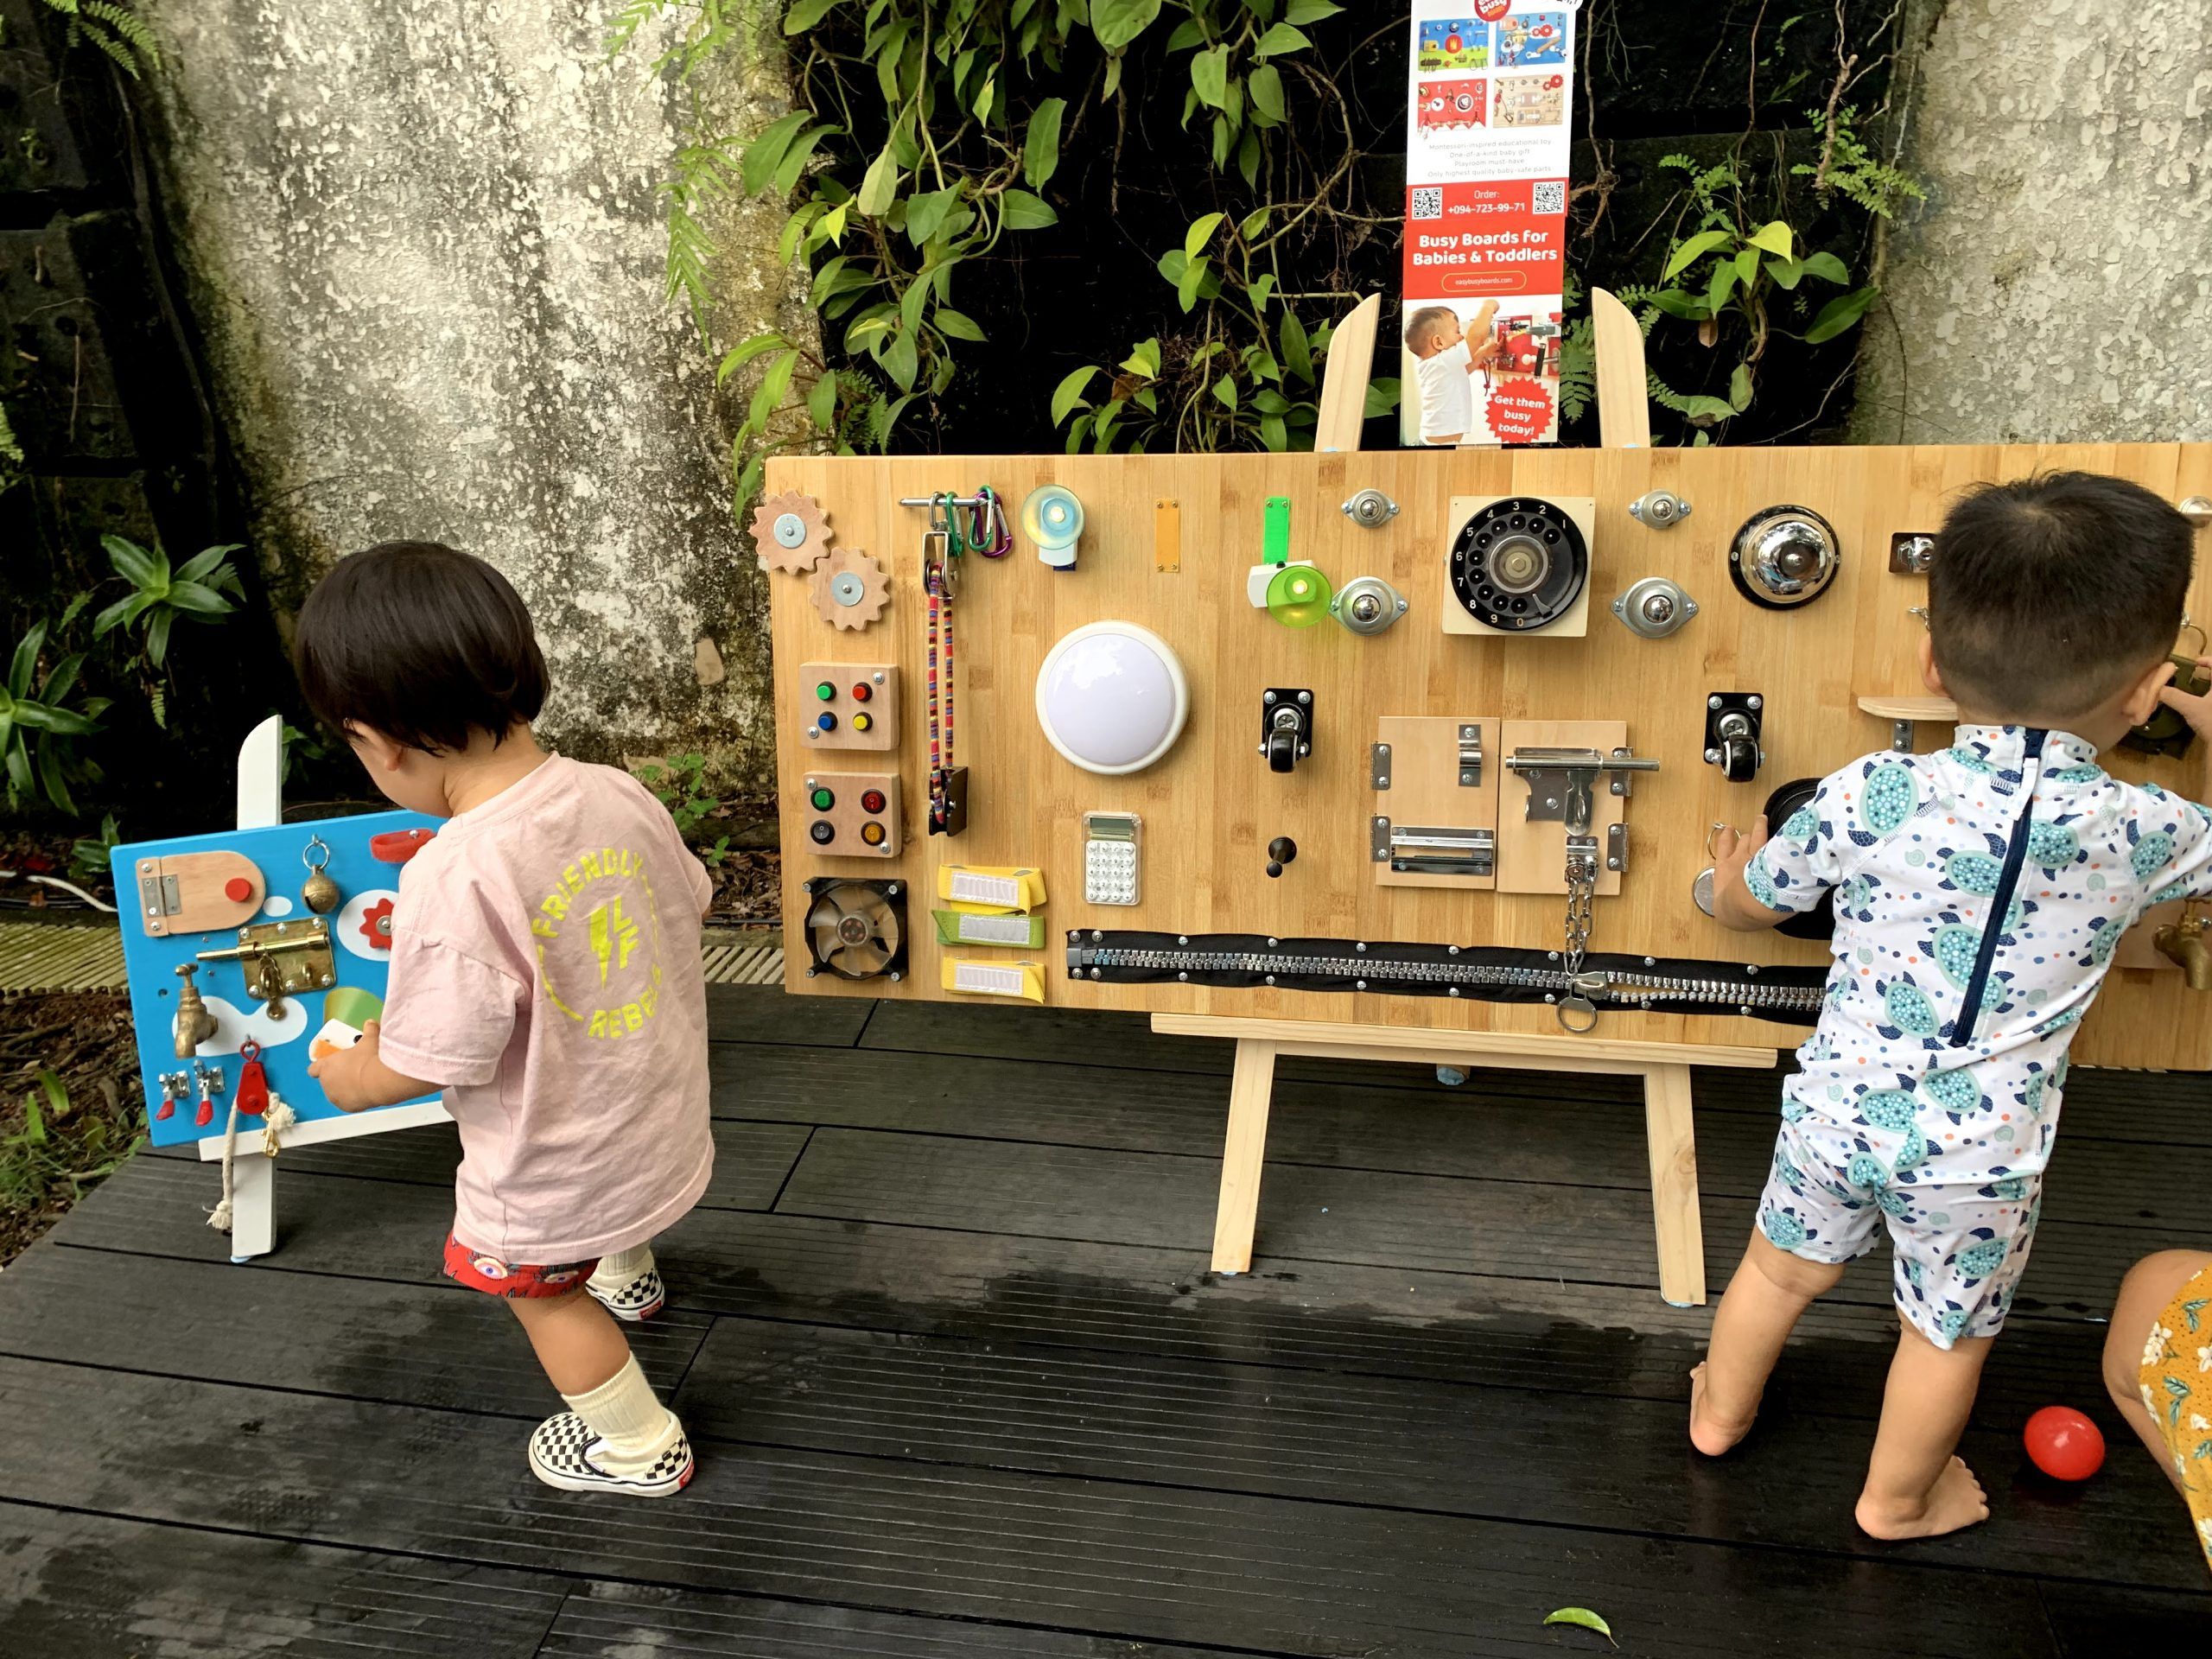 How to Make a Toddler Busy Board that Really Entertains